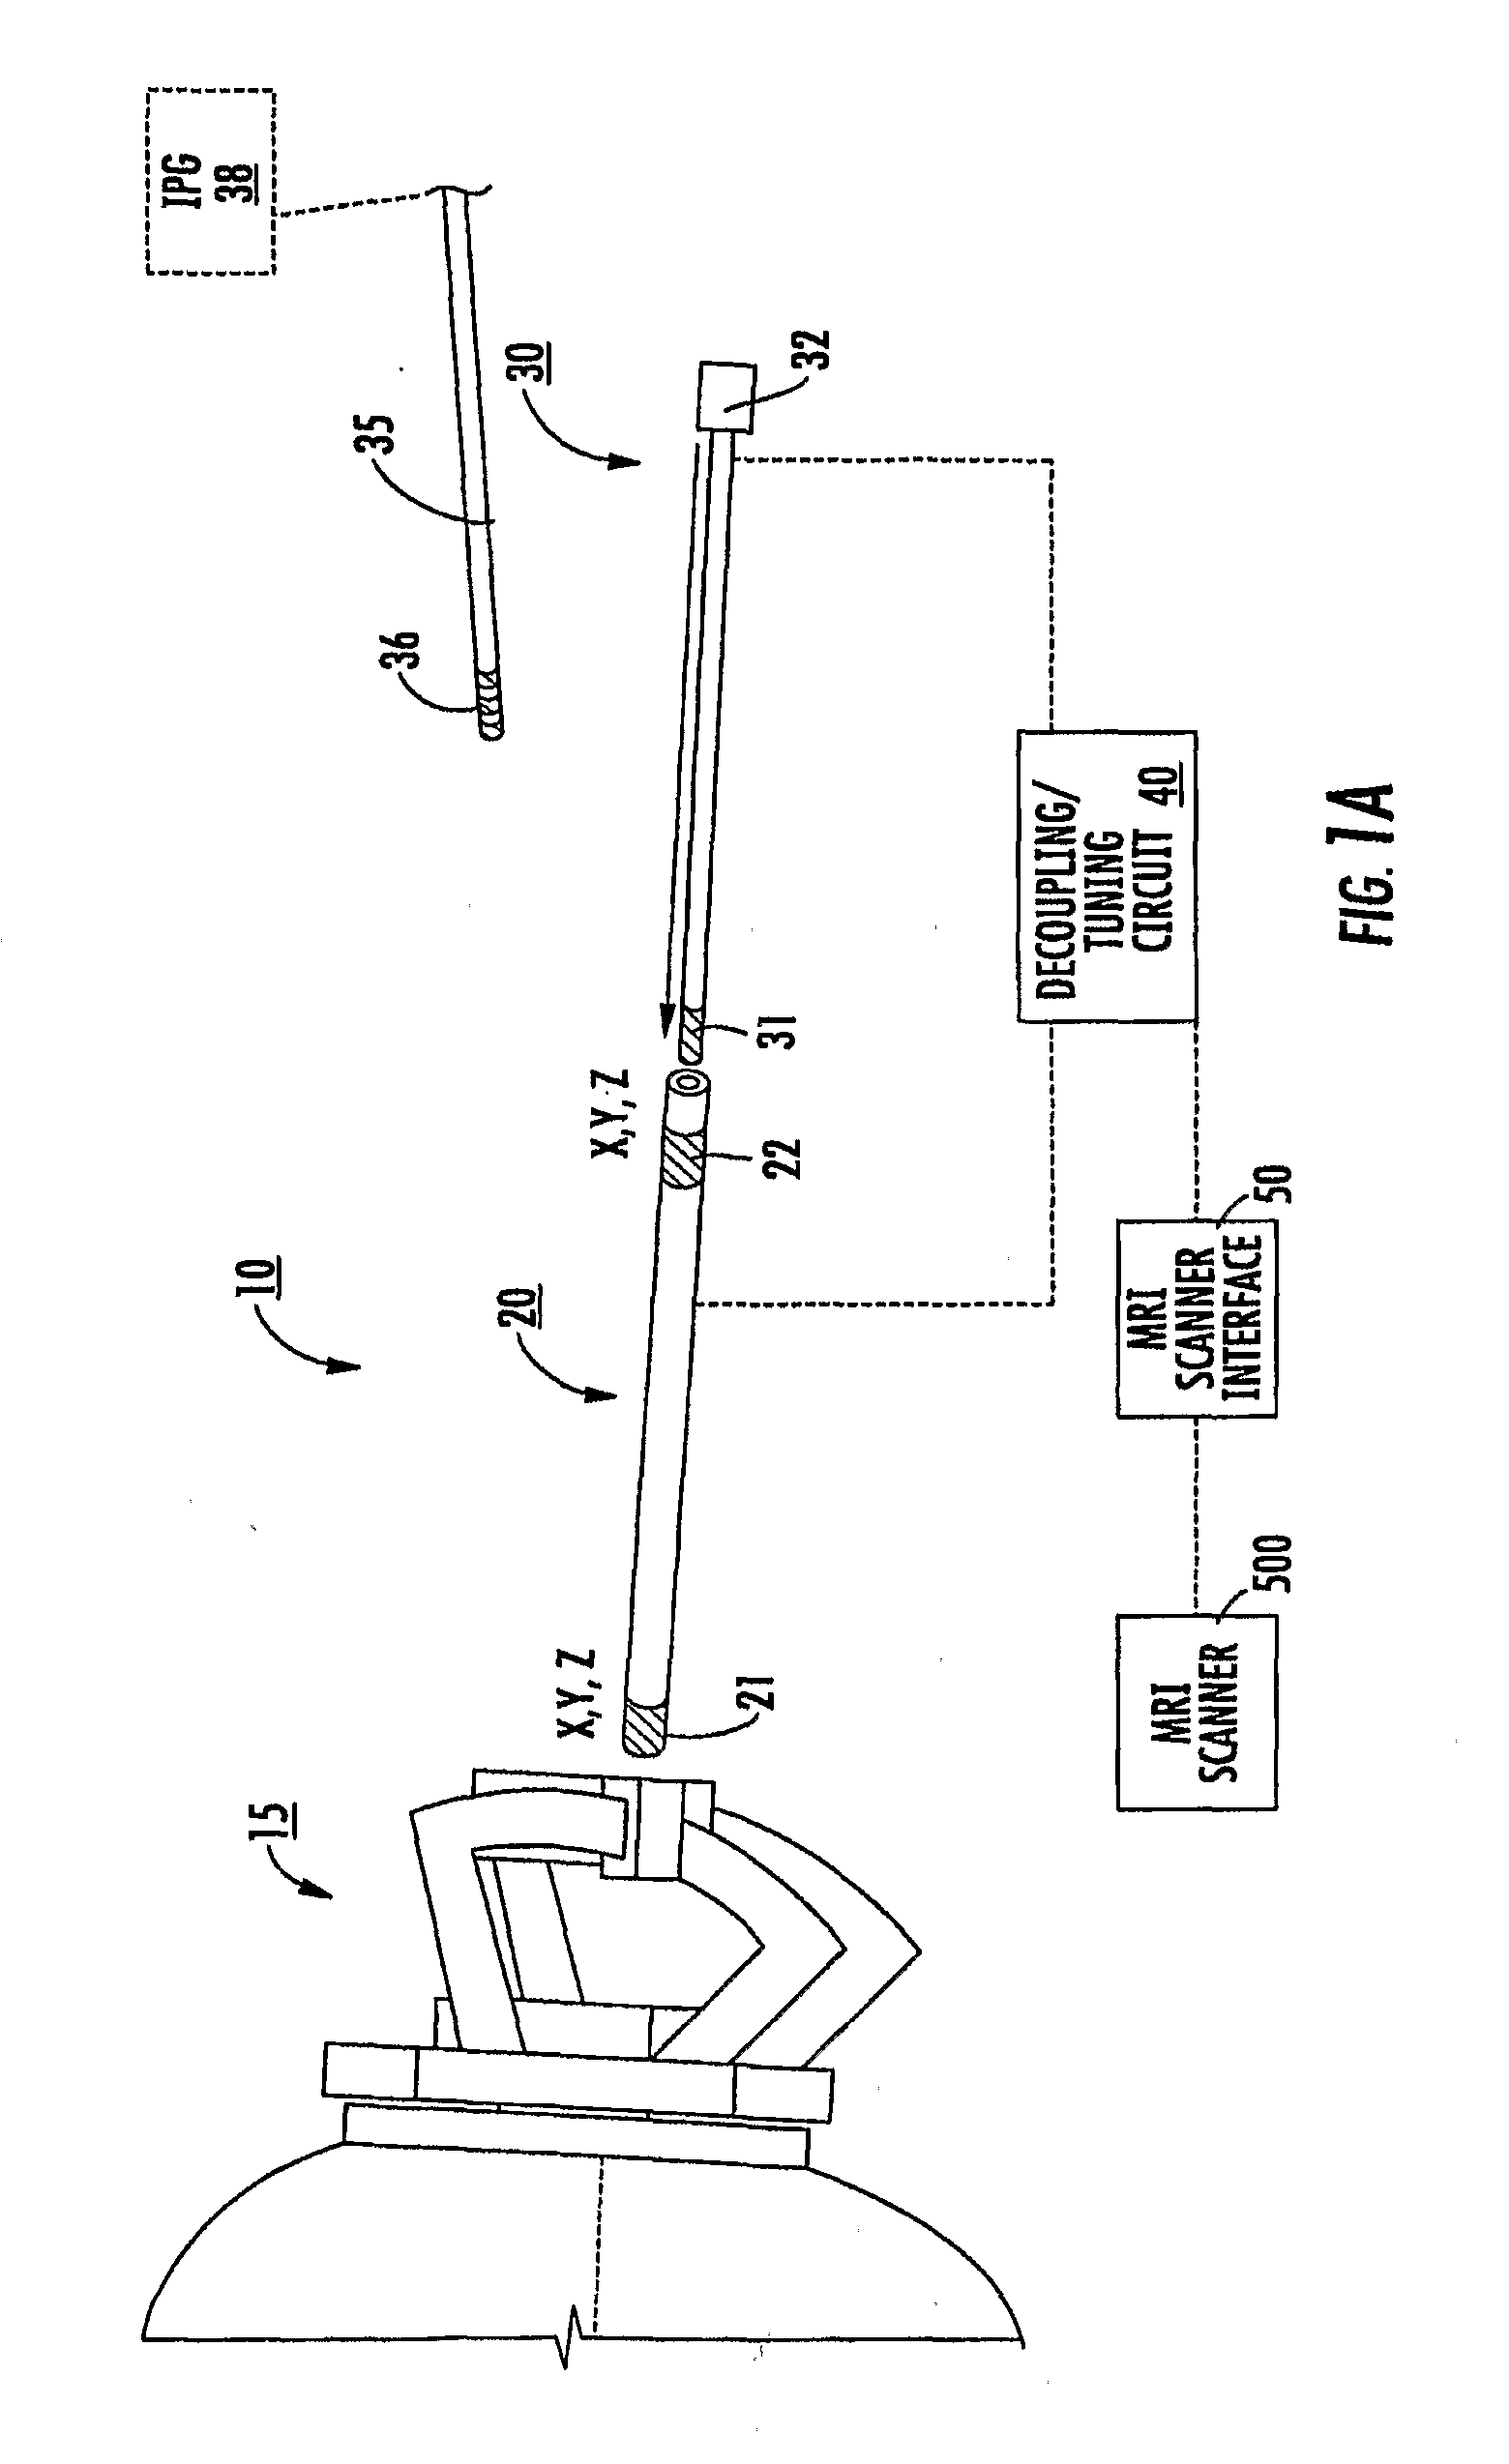 Mri-guided localization and/or lead placement systems, related methods, devices and computer program products